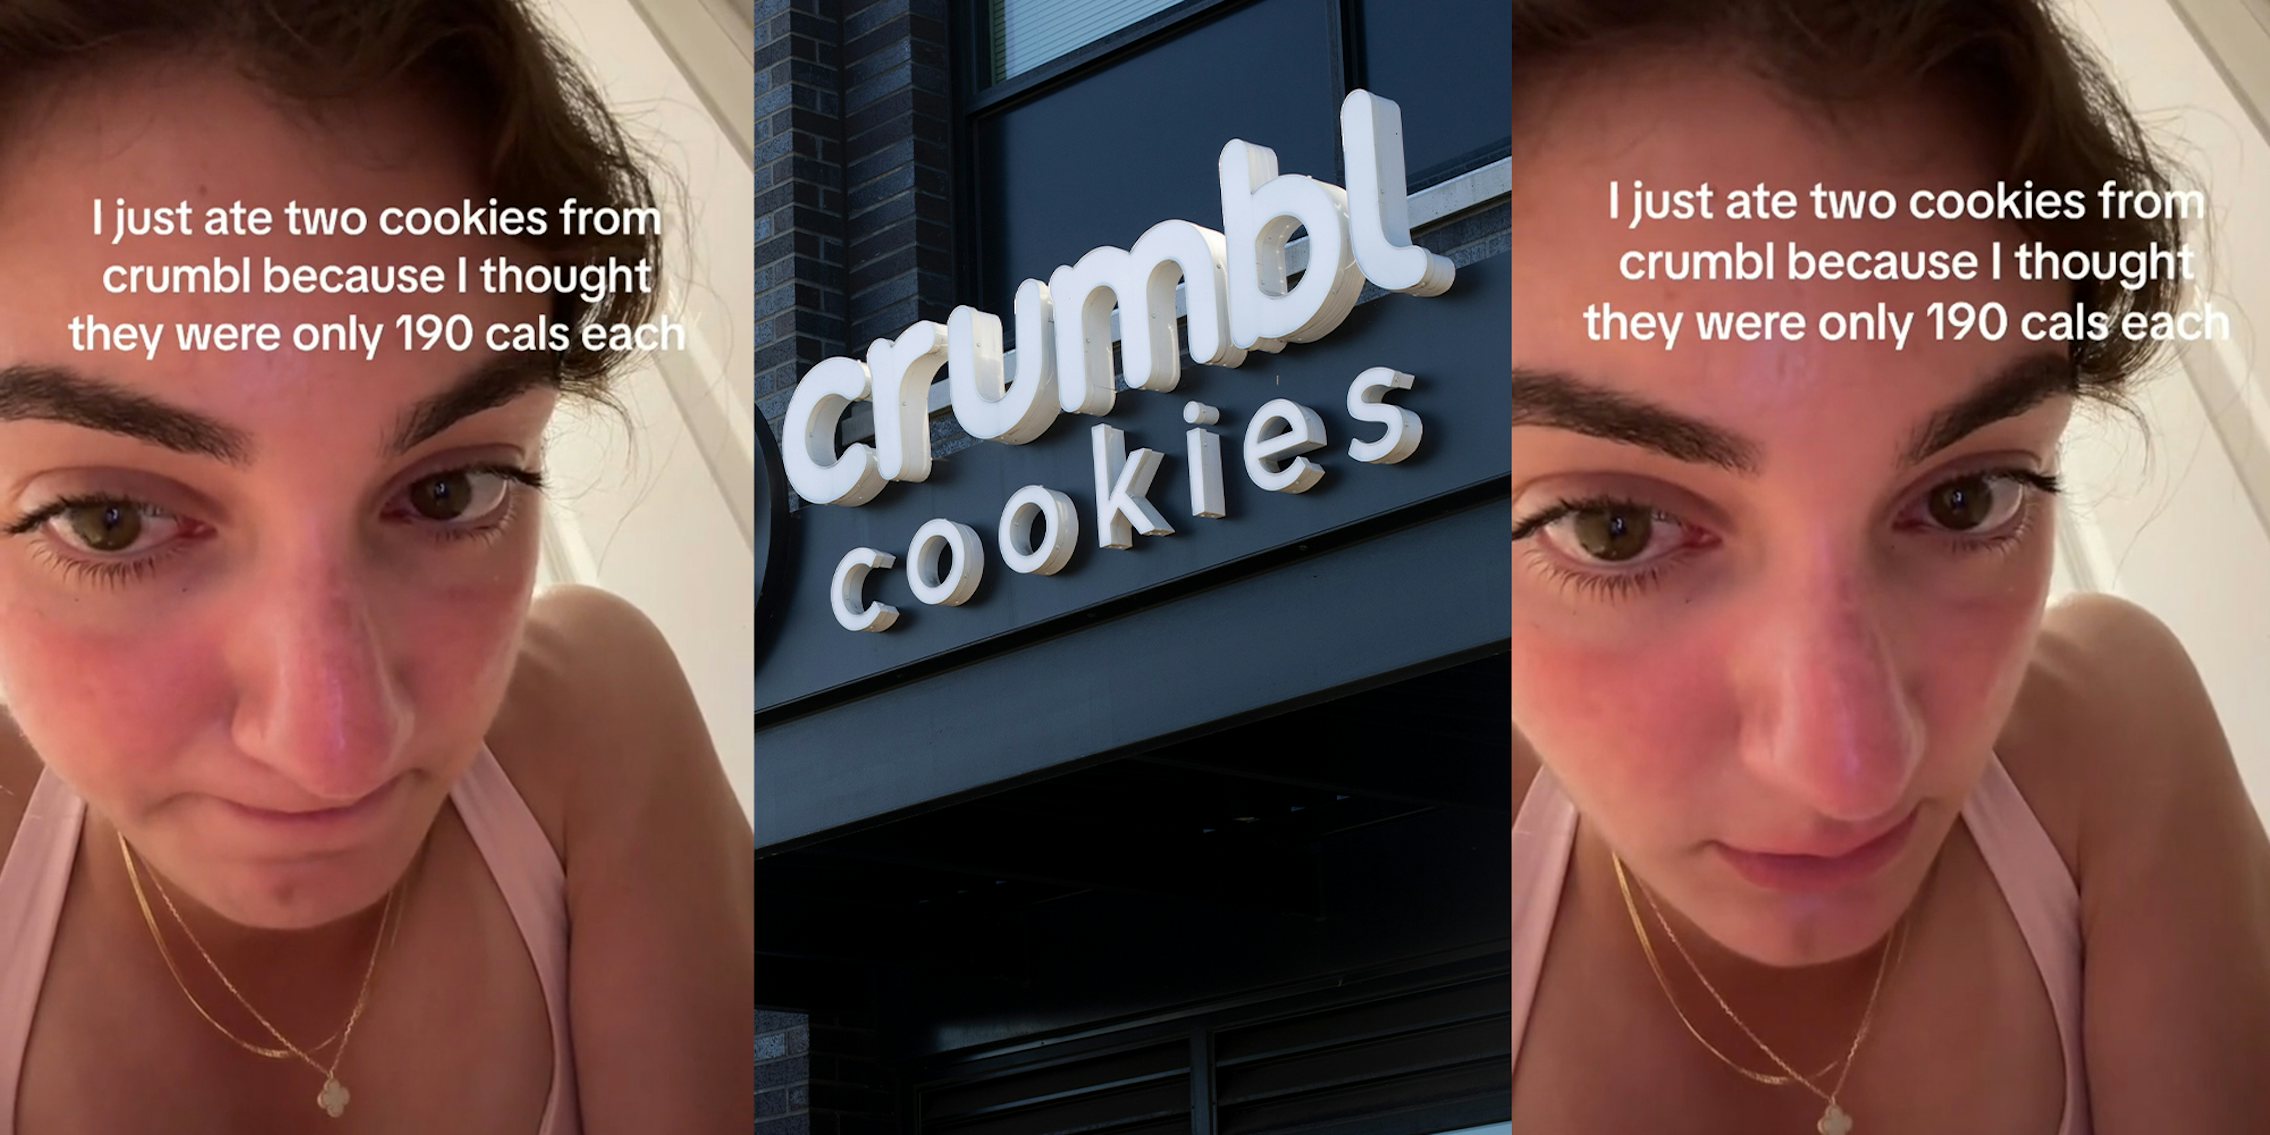 People are just finding out how much calories Crumbl cookies have